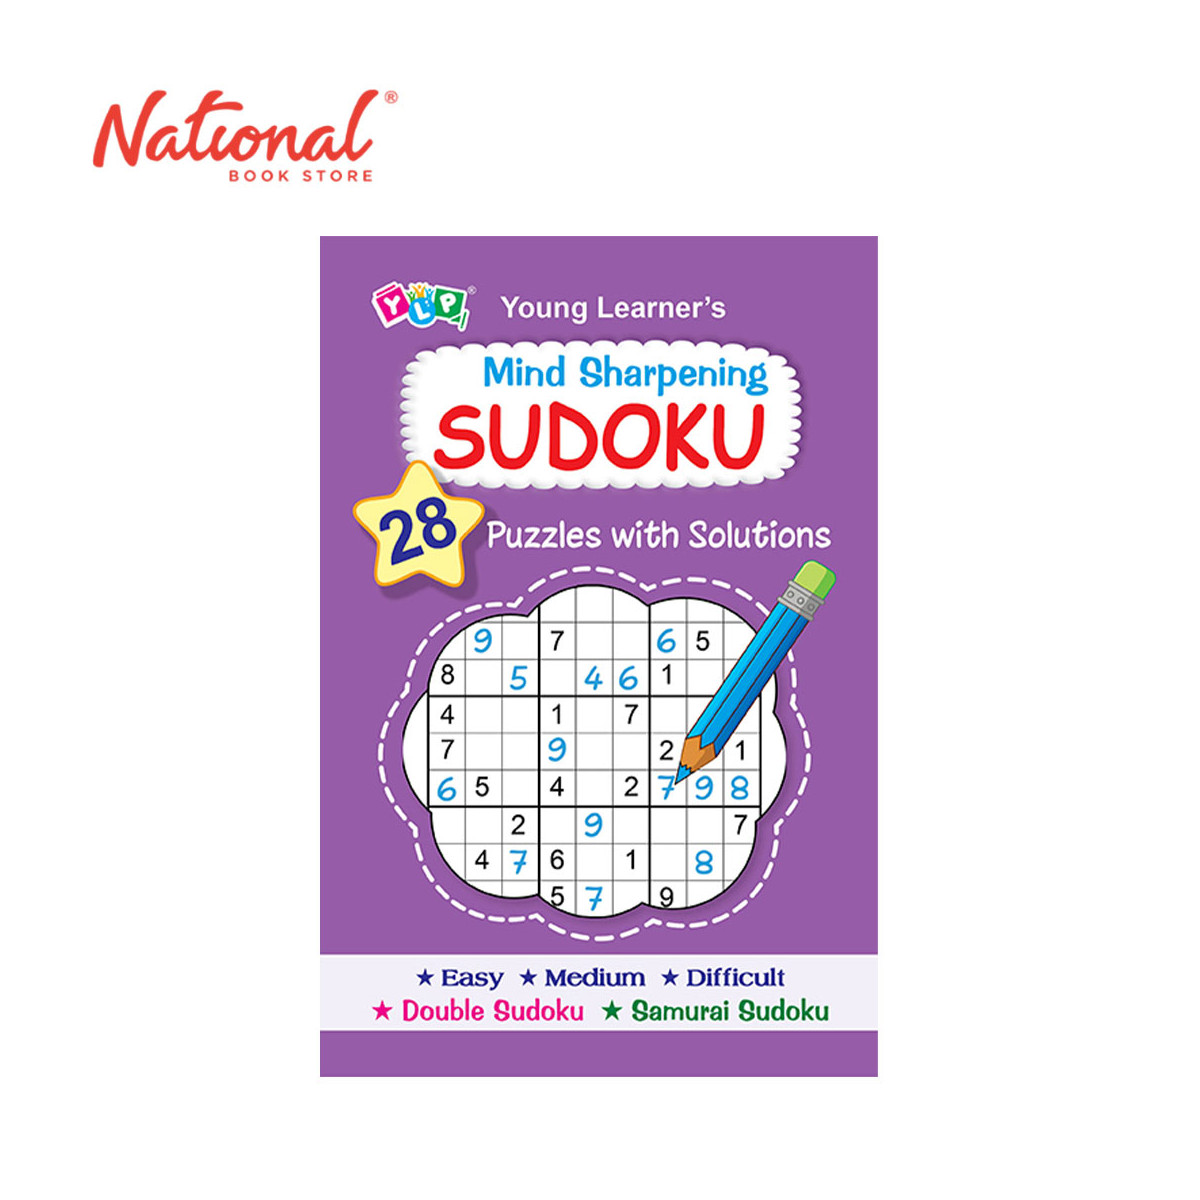 Young Learner's: Mind Sharpening Sudoku - Trade Paperback - Hobbies for Kids - Puzzles for Kids